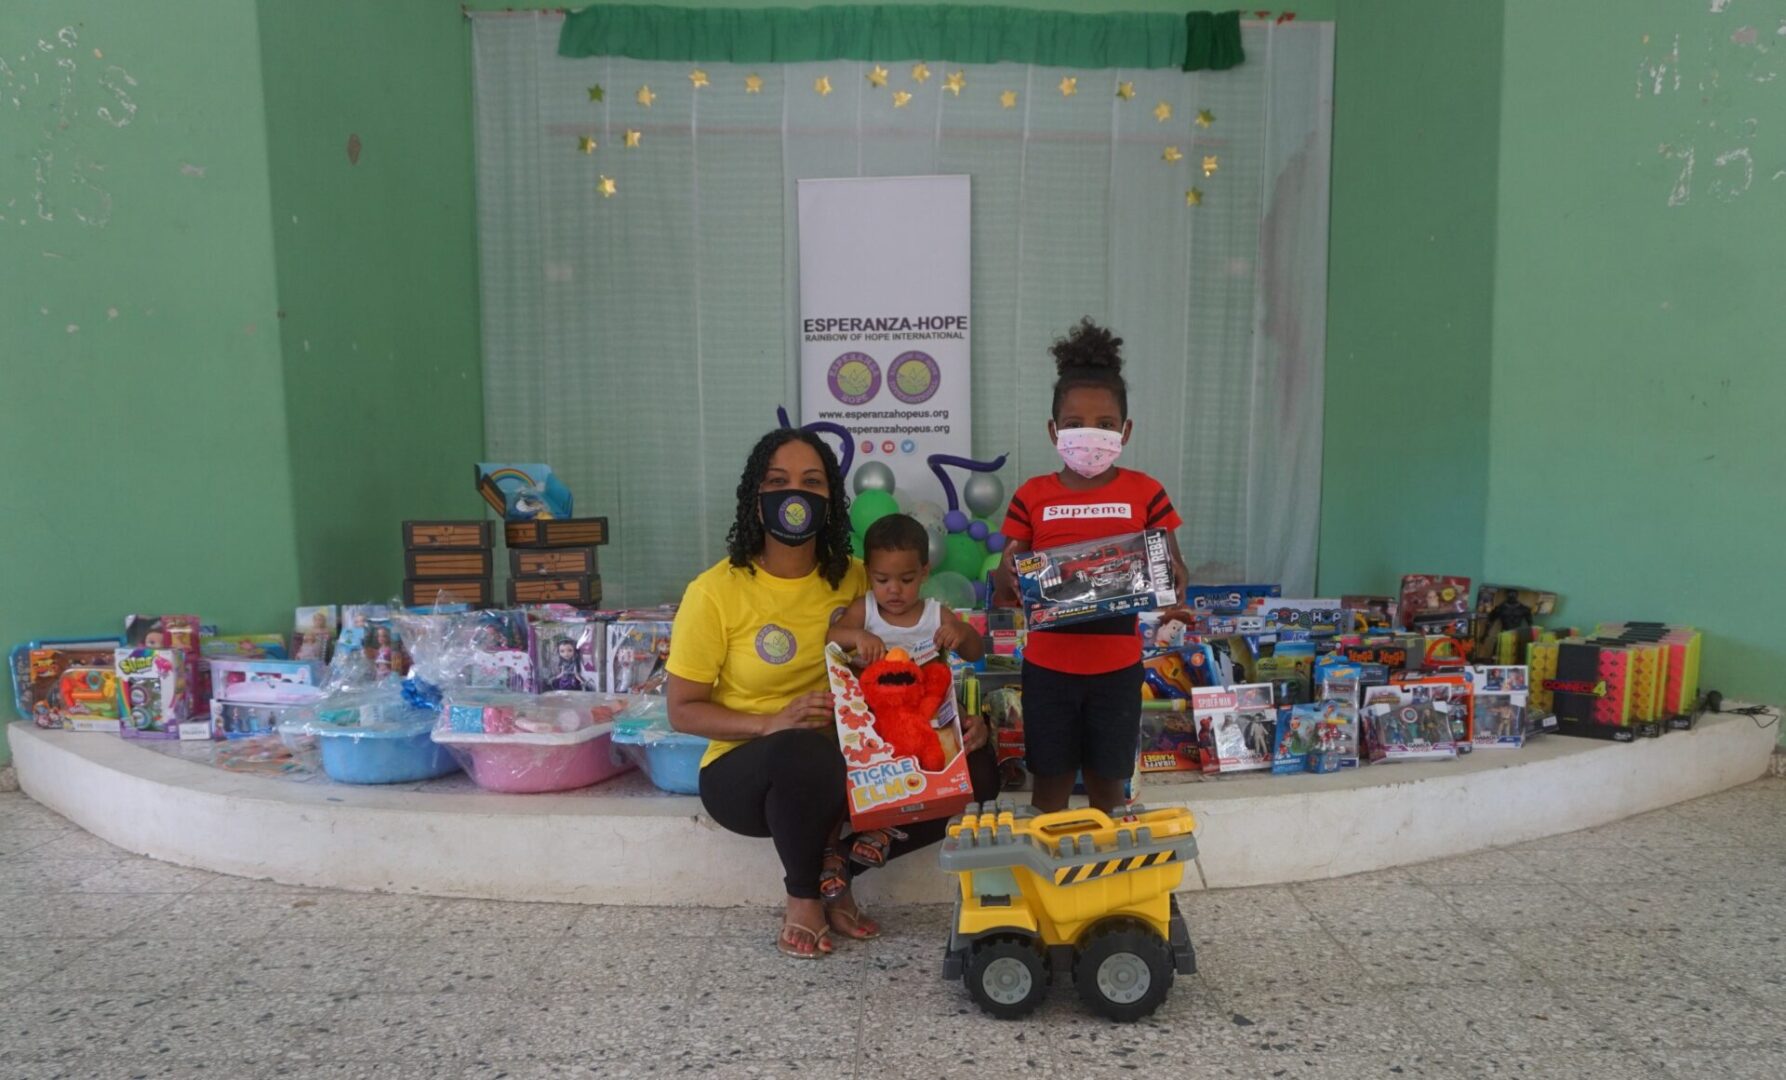 A female staff, a boy with Elmo toy, and another child holding a toy truck